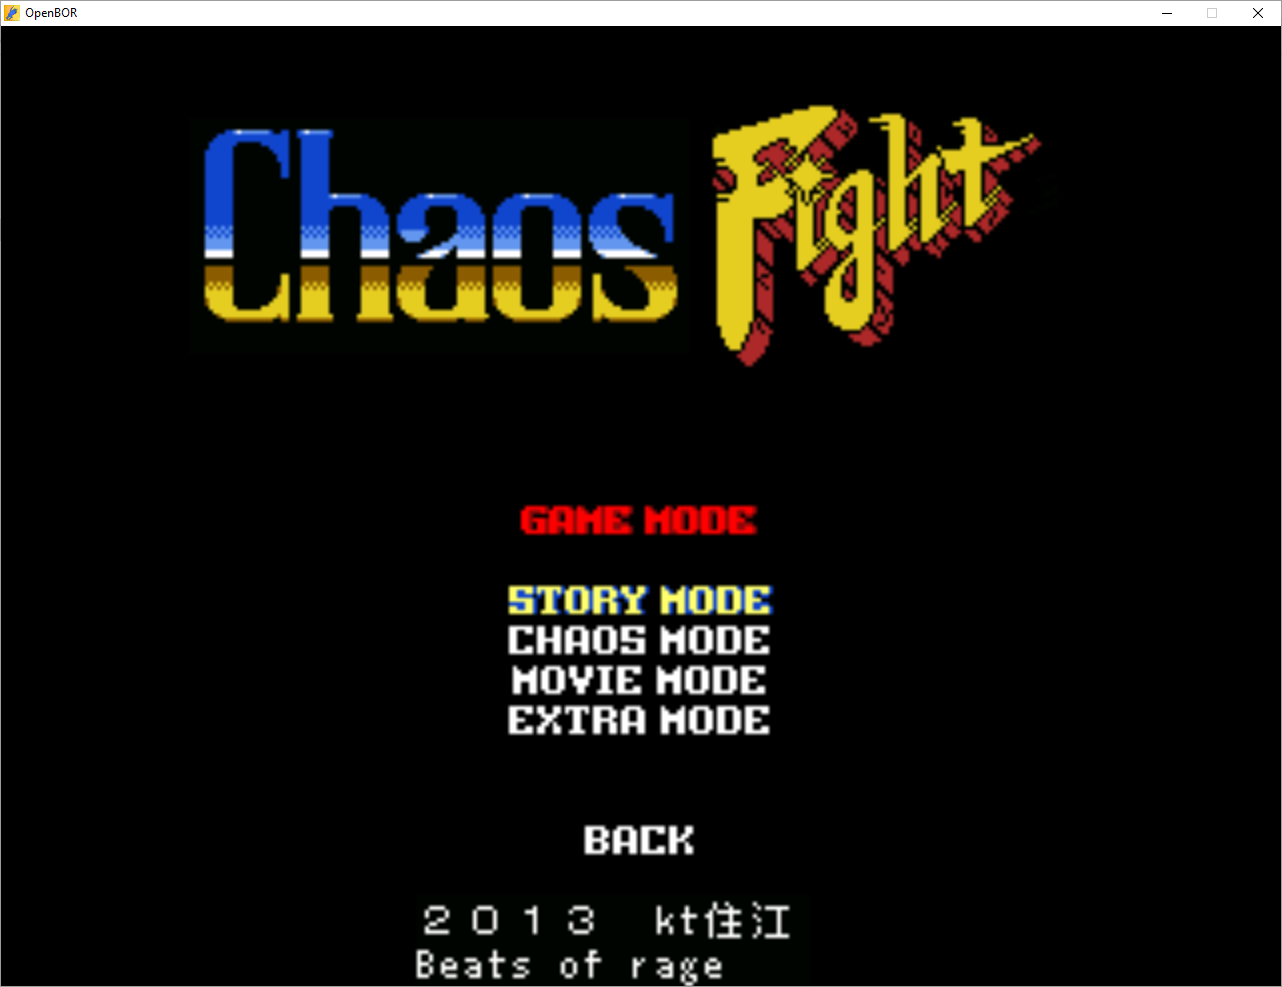 chaos-fight-info.